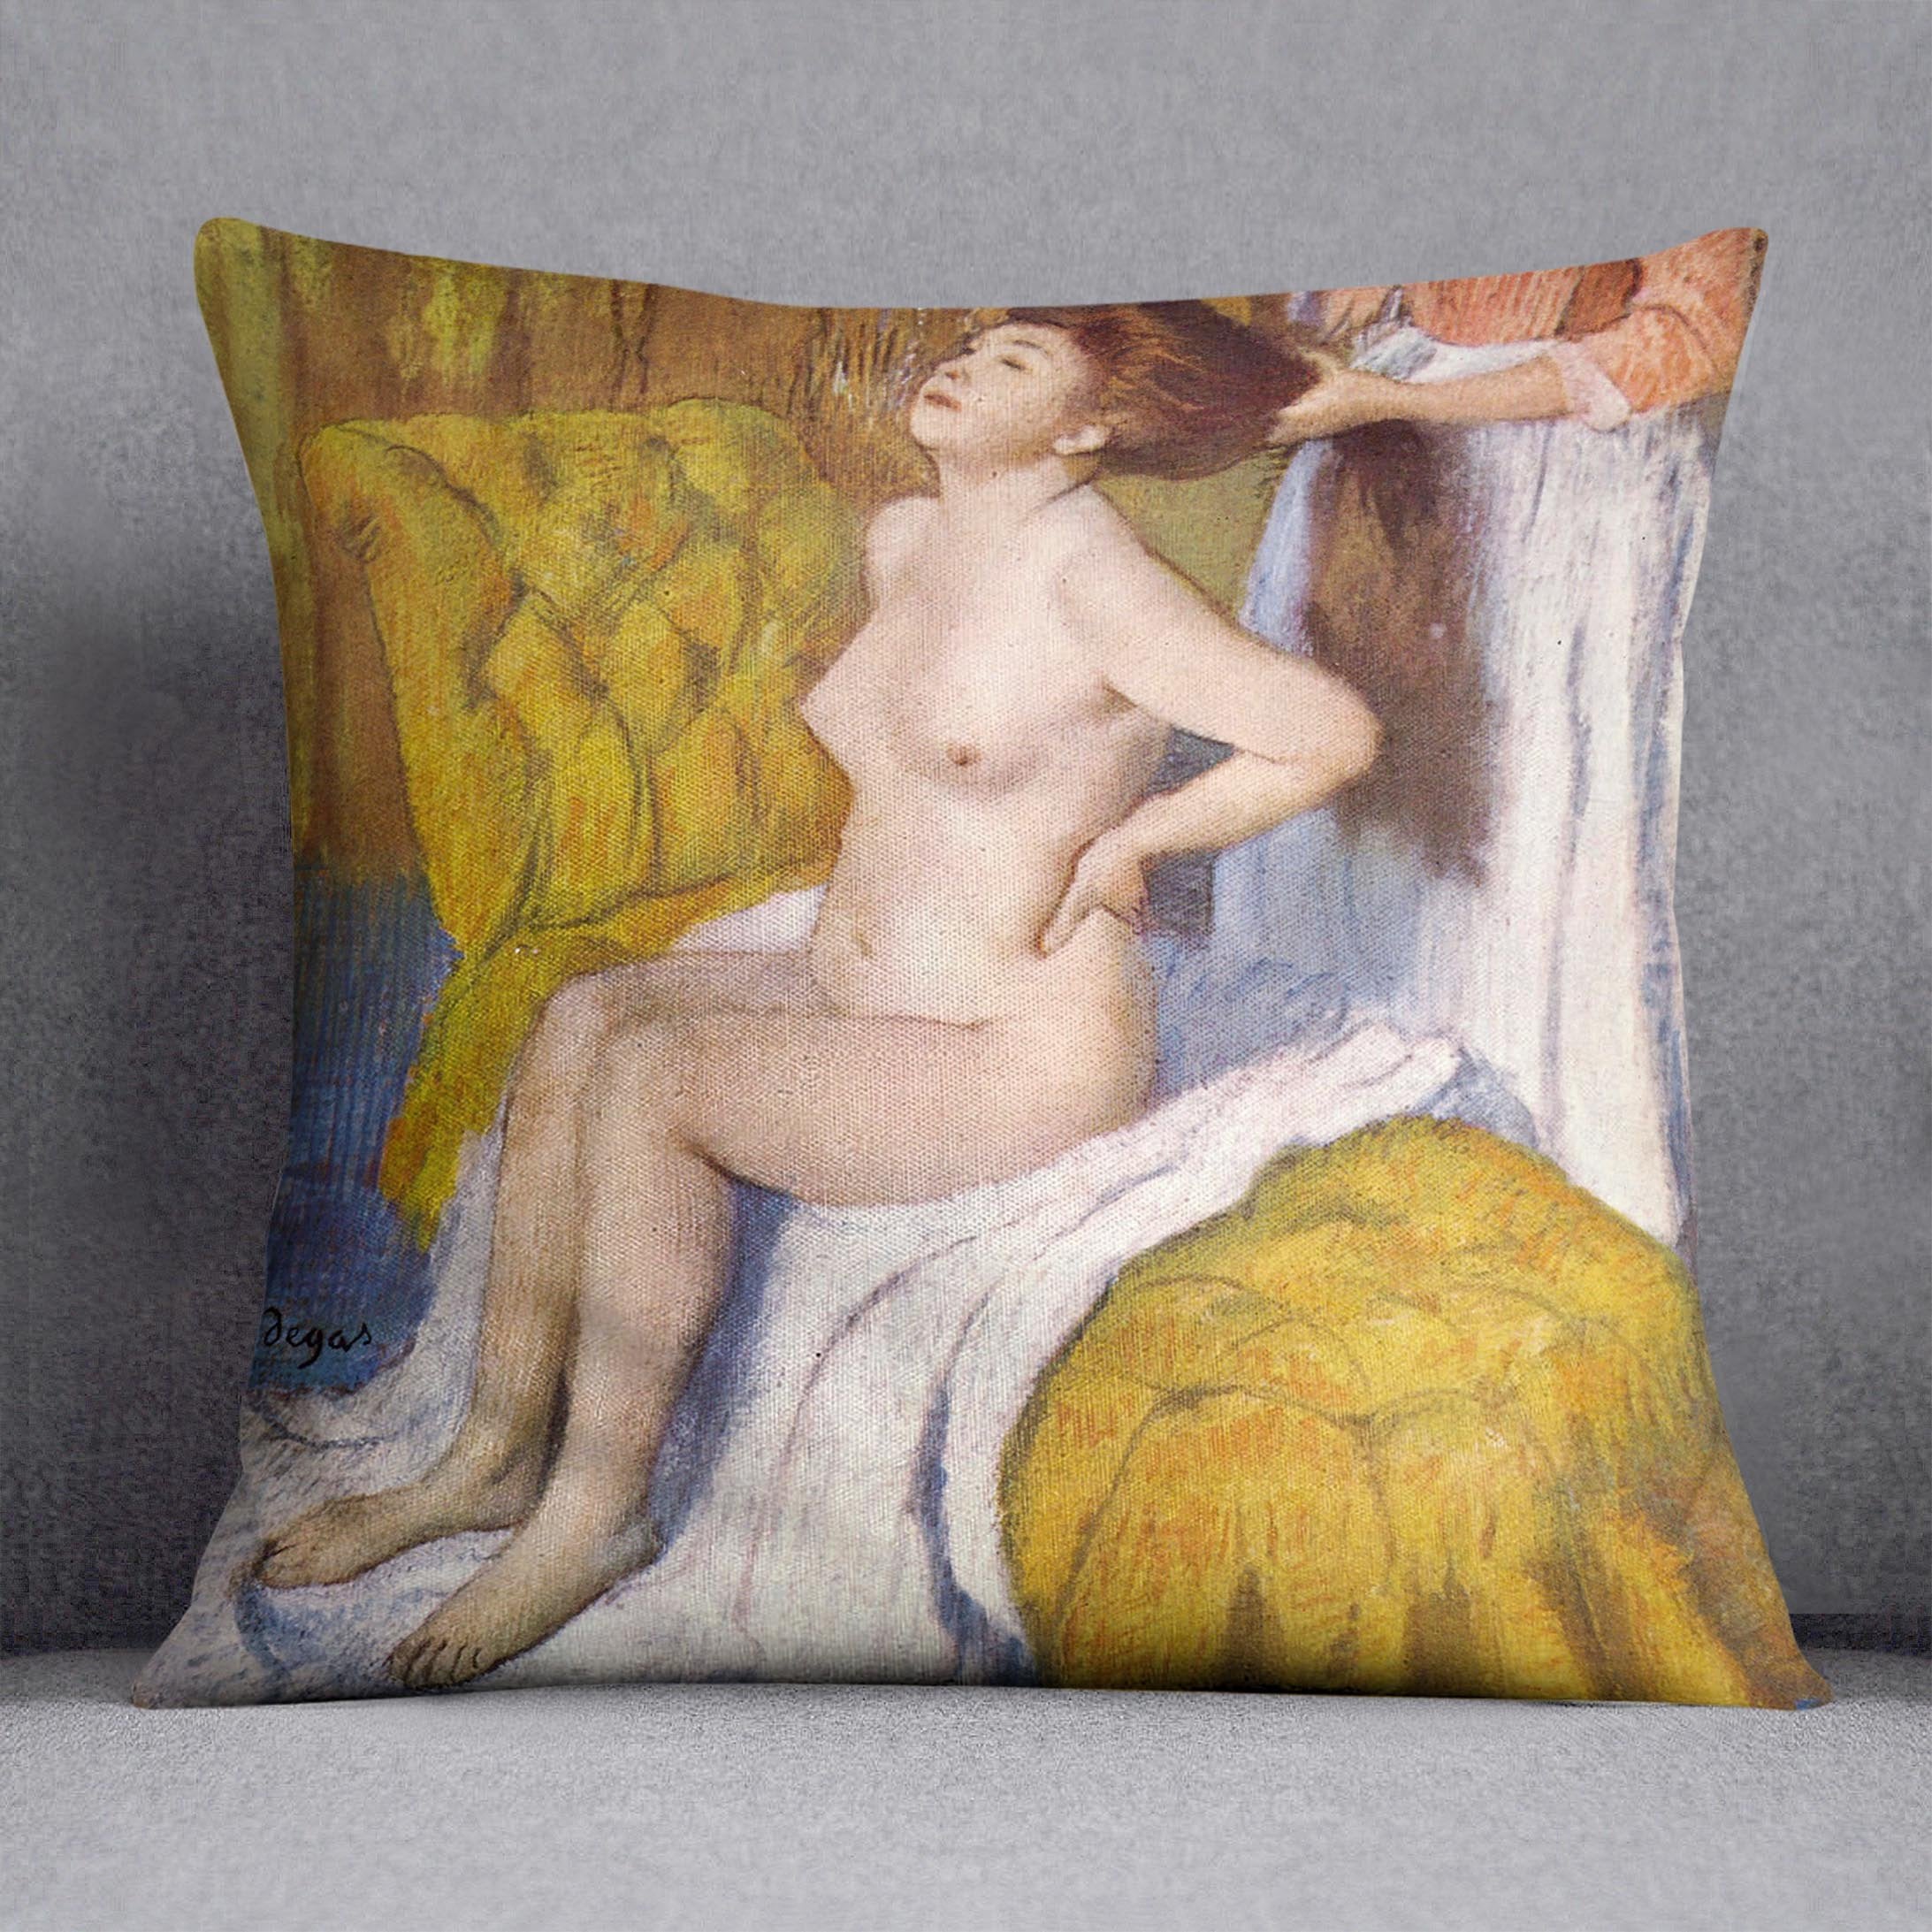 The Body Care by Degas Cushion